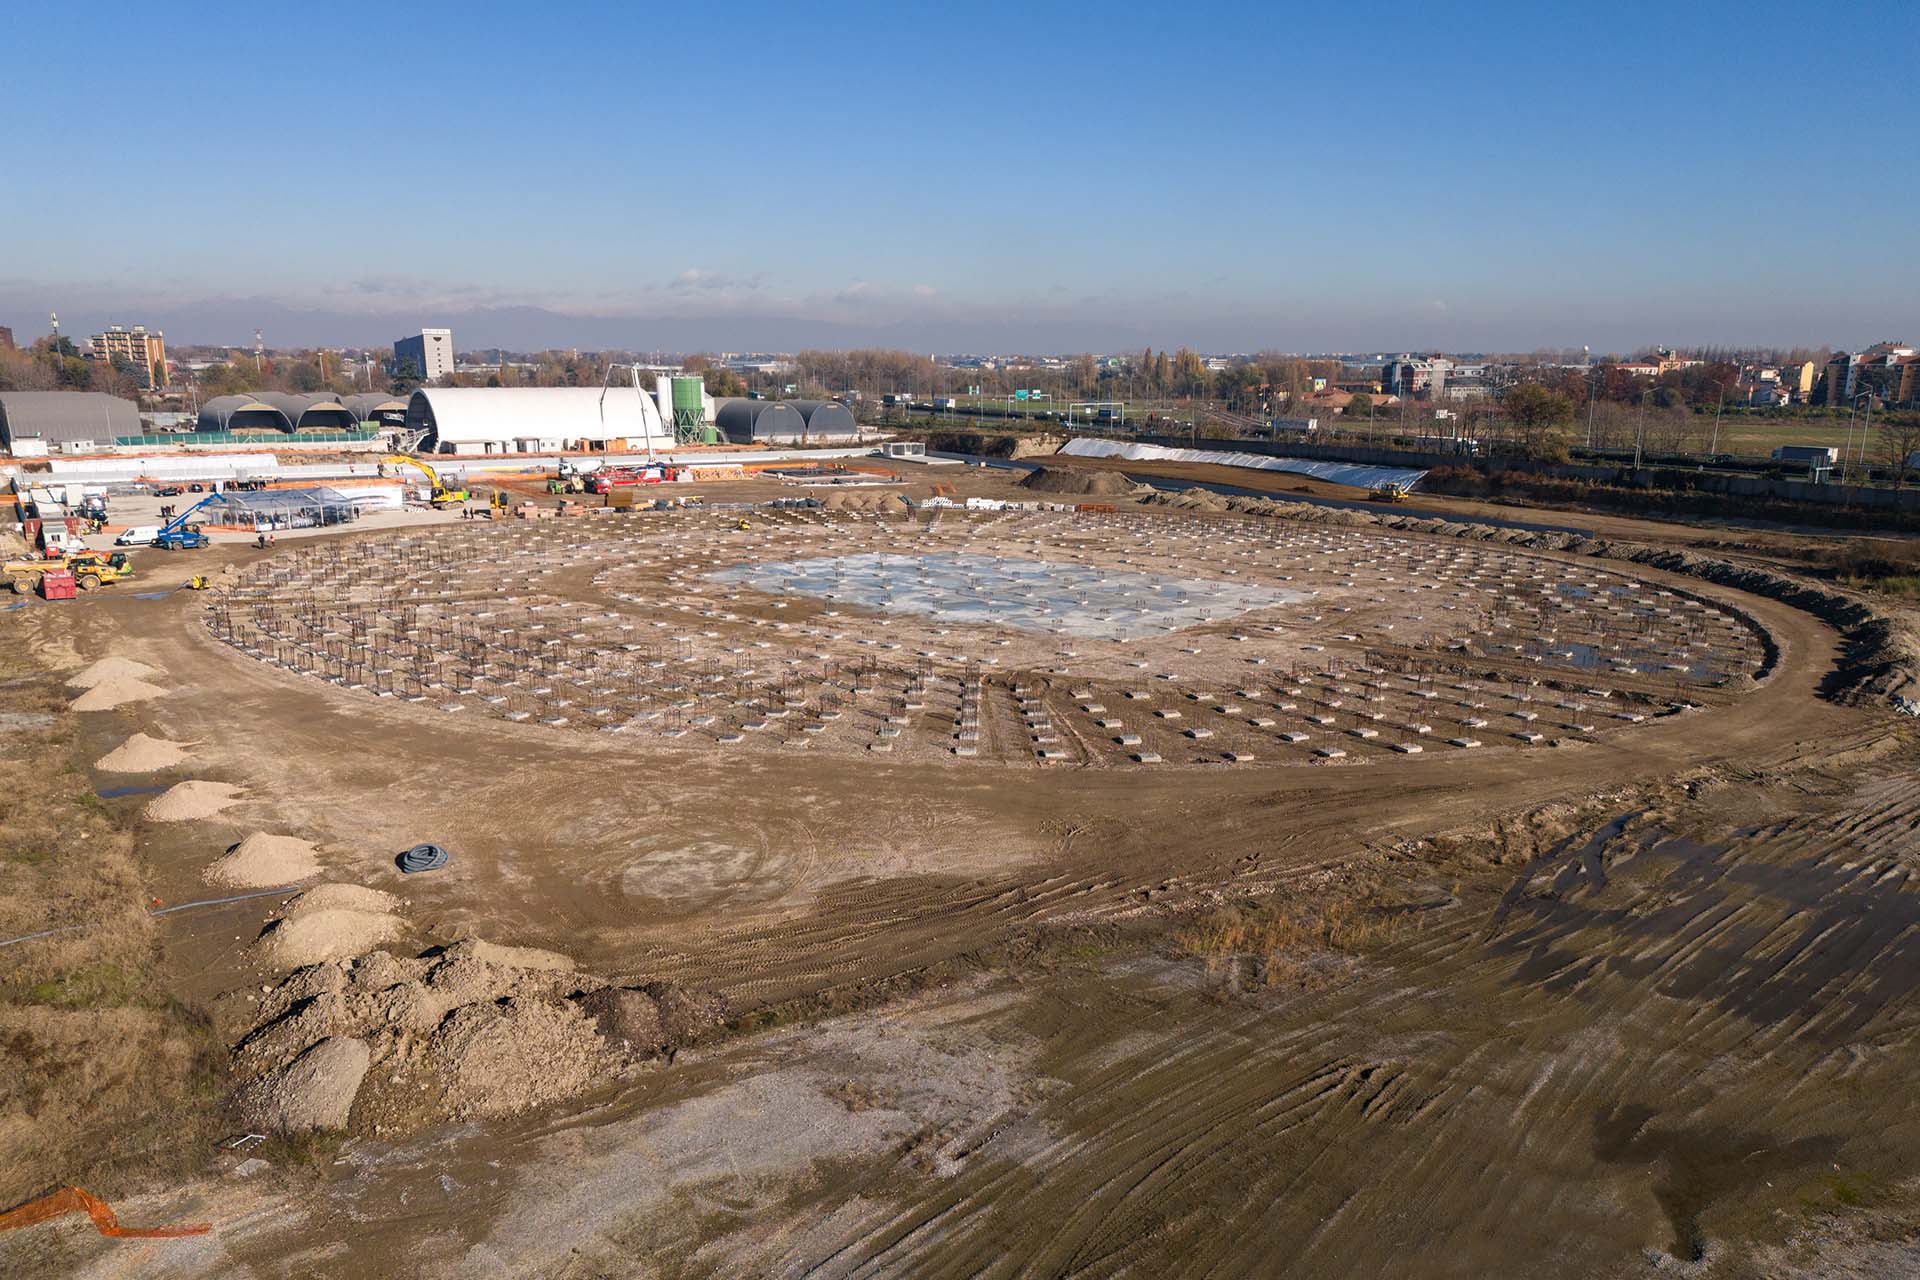 Construction of the new Santa Giulia Arena in Milan - IT - ITINERA S.p.A. -  Large infrastructural project and civil buildings